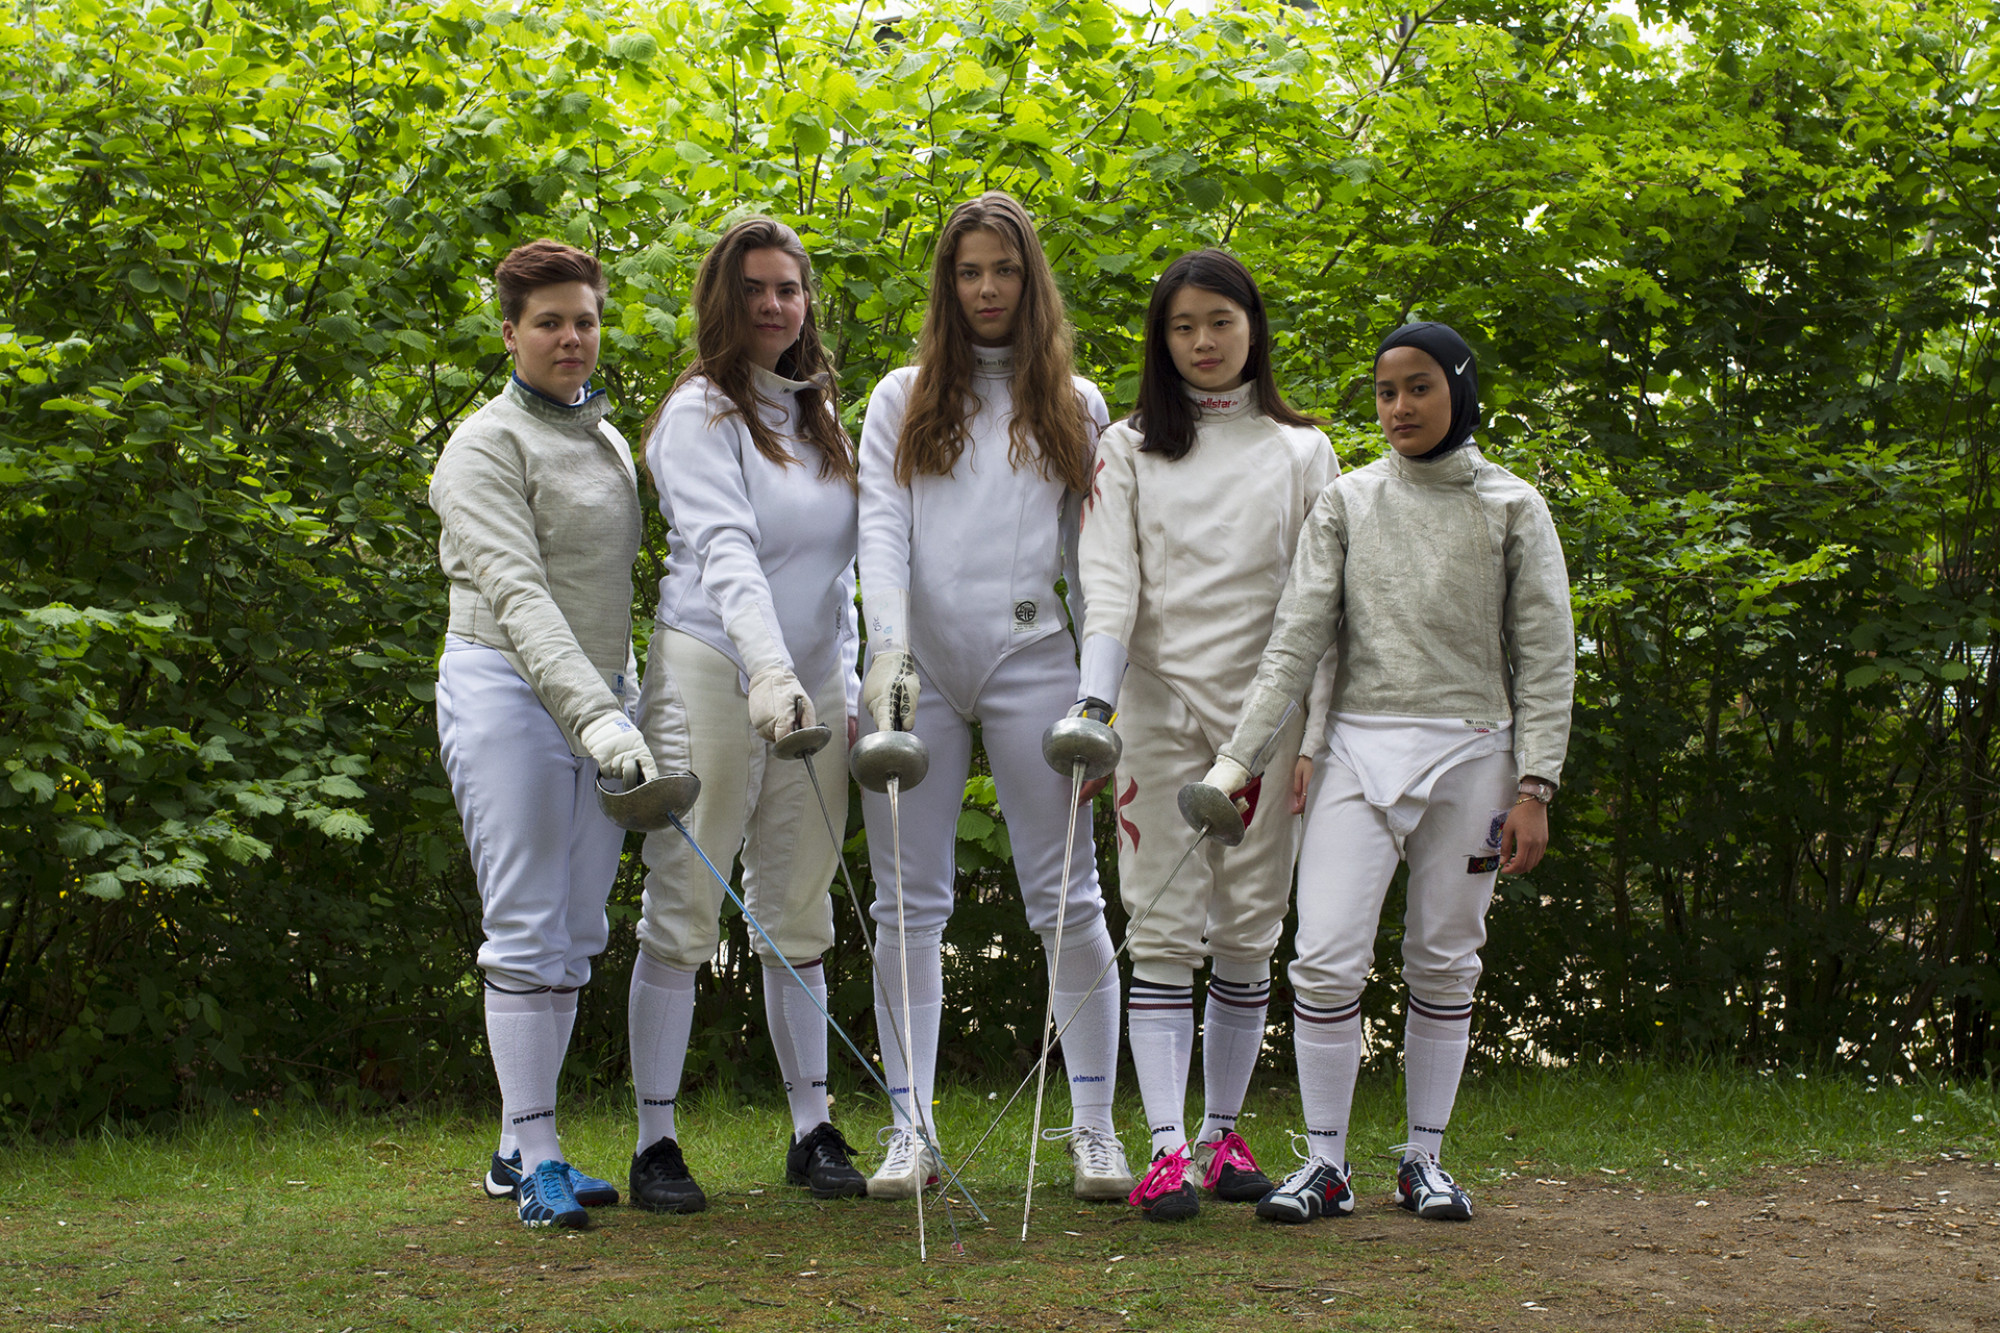 Women's fencing team stood together in wooded area in full sports kit holding swords toward ground in a line